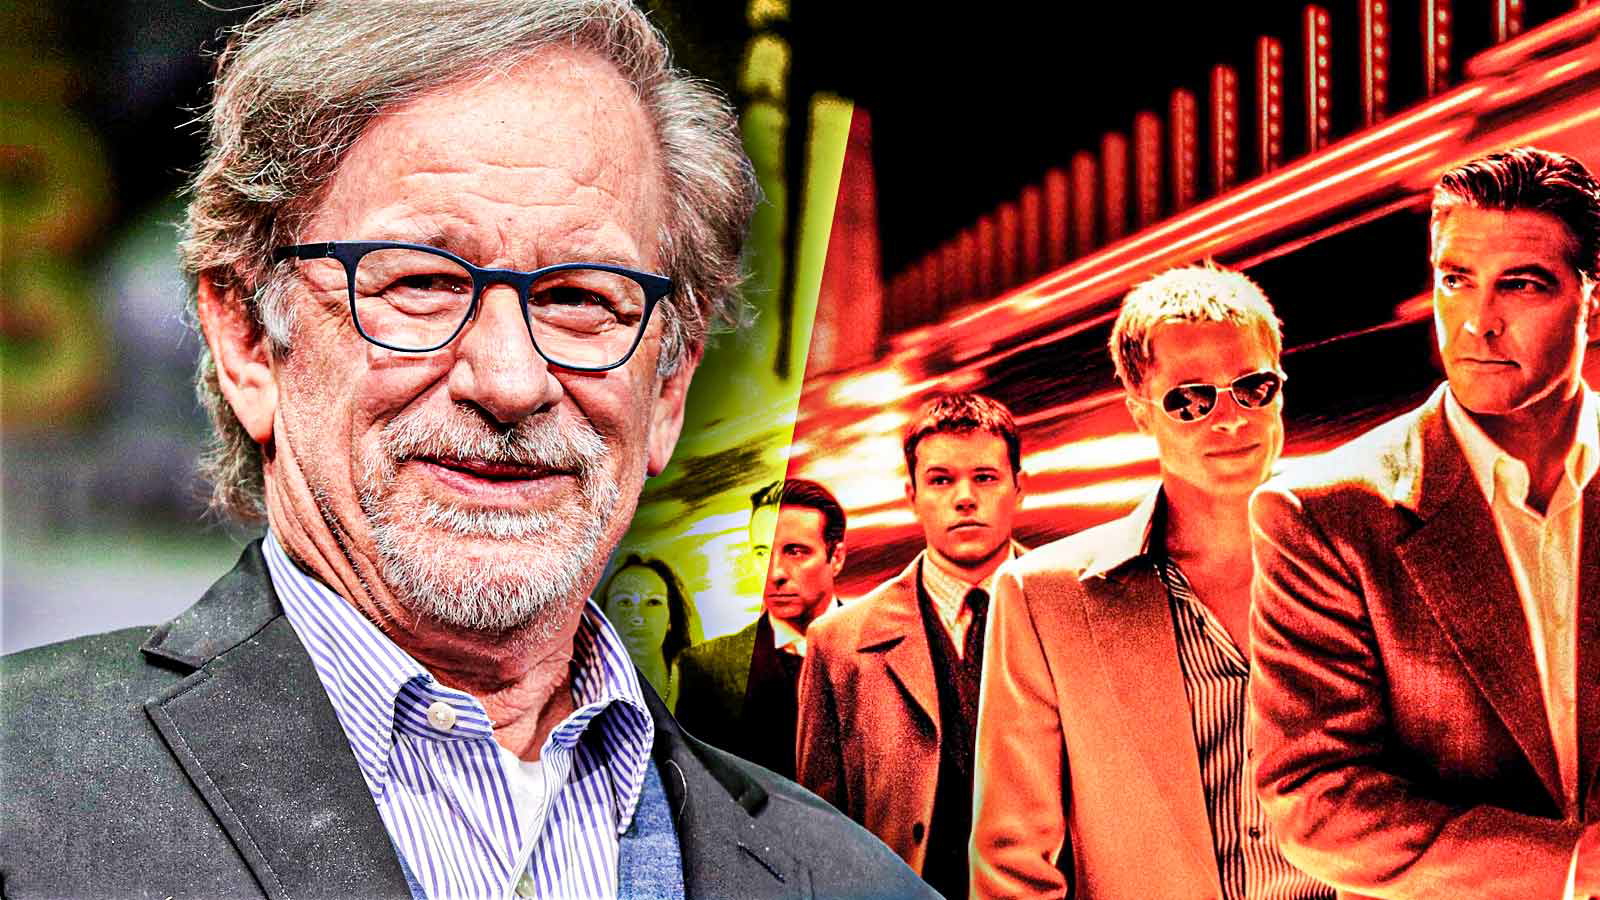 Steven Spielberg Pulled an Ocean’s 11 Trick on One of Hollywood’s Biggest Studios, Ended Up Creating History as Its Youngest Director